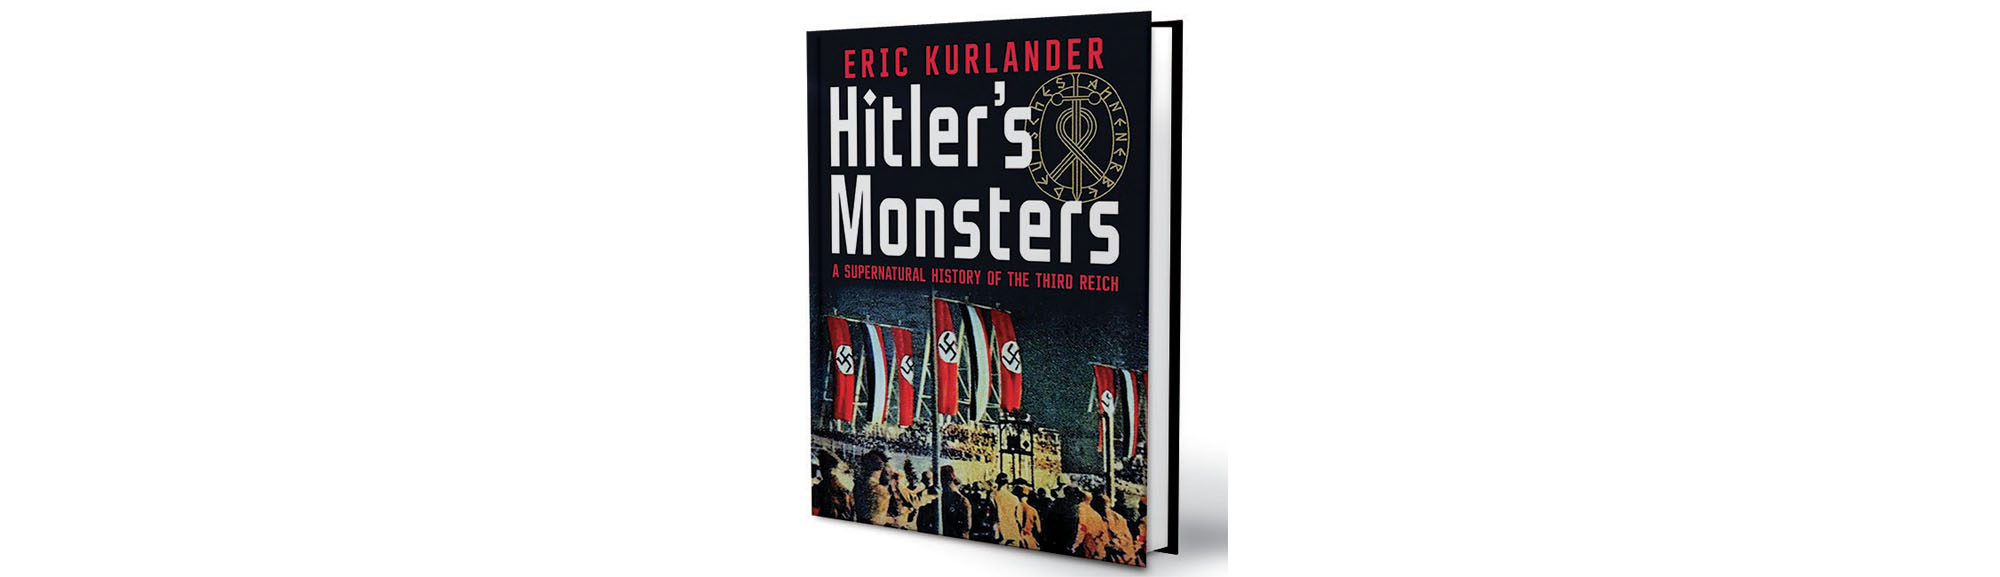 Book Review: Hitler’s Monsters by Eric Kurlander